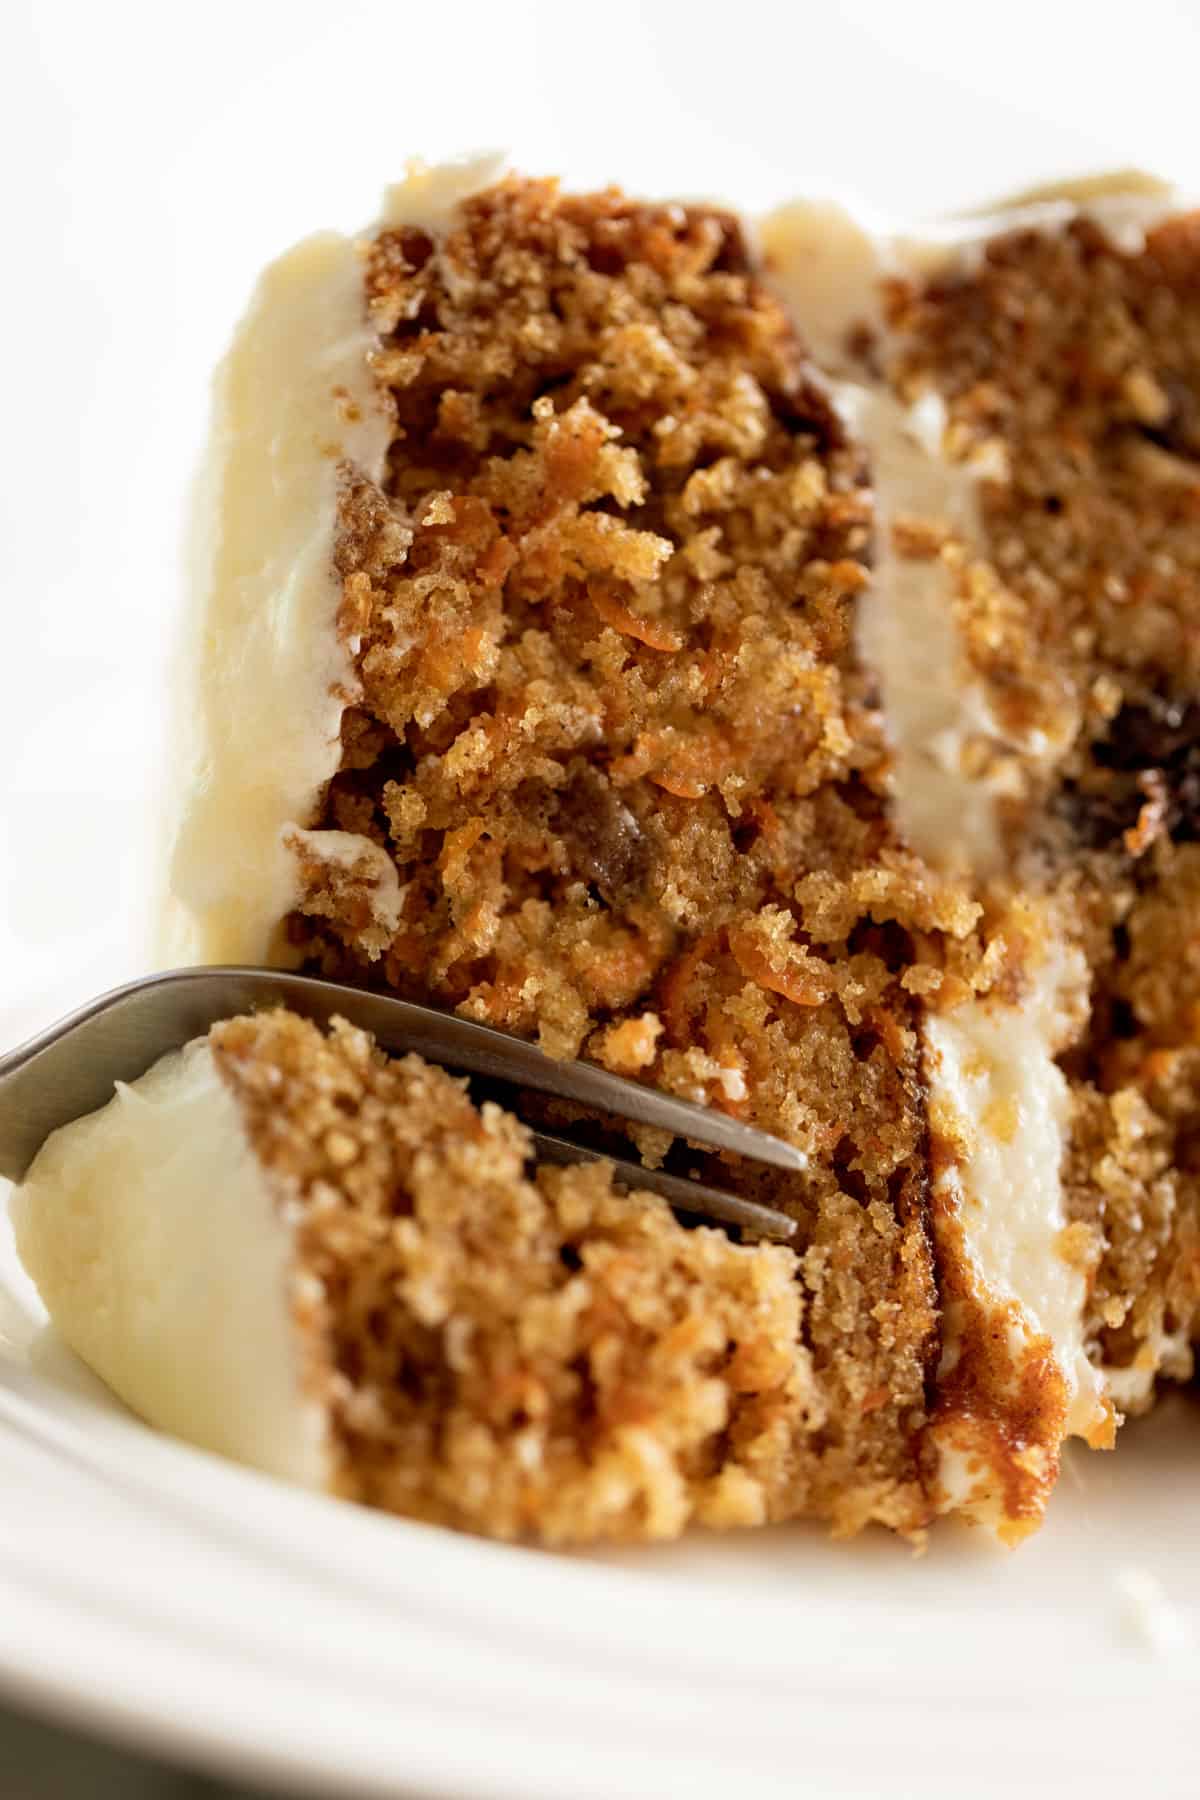 A slice of carrot cake with a fork | cafedelites.com